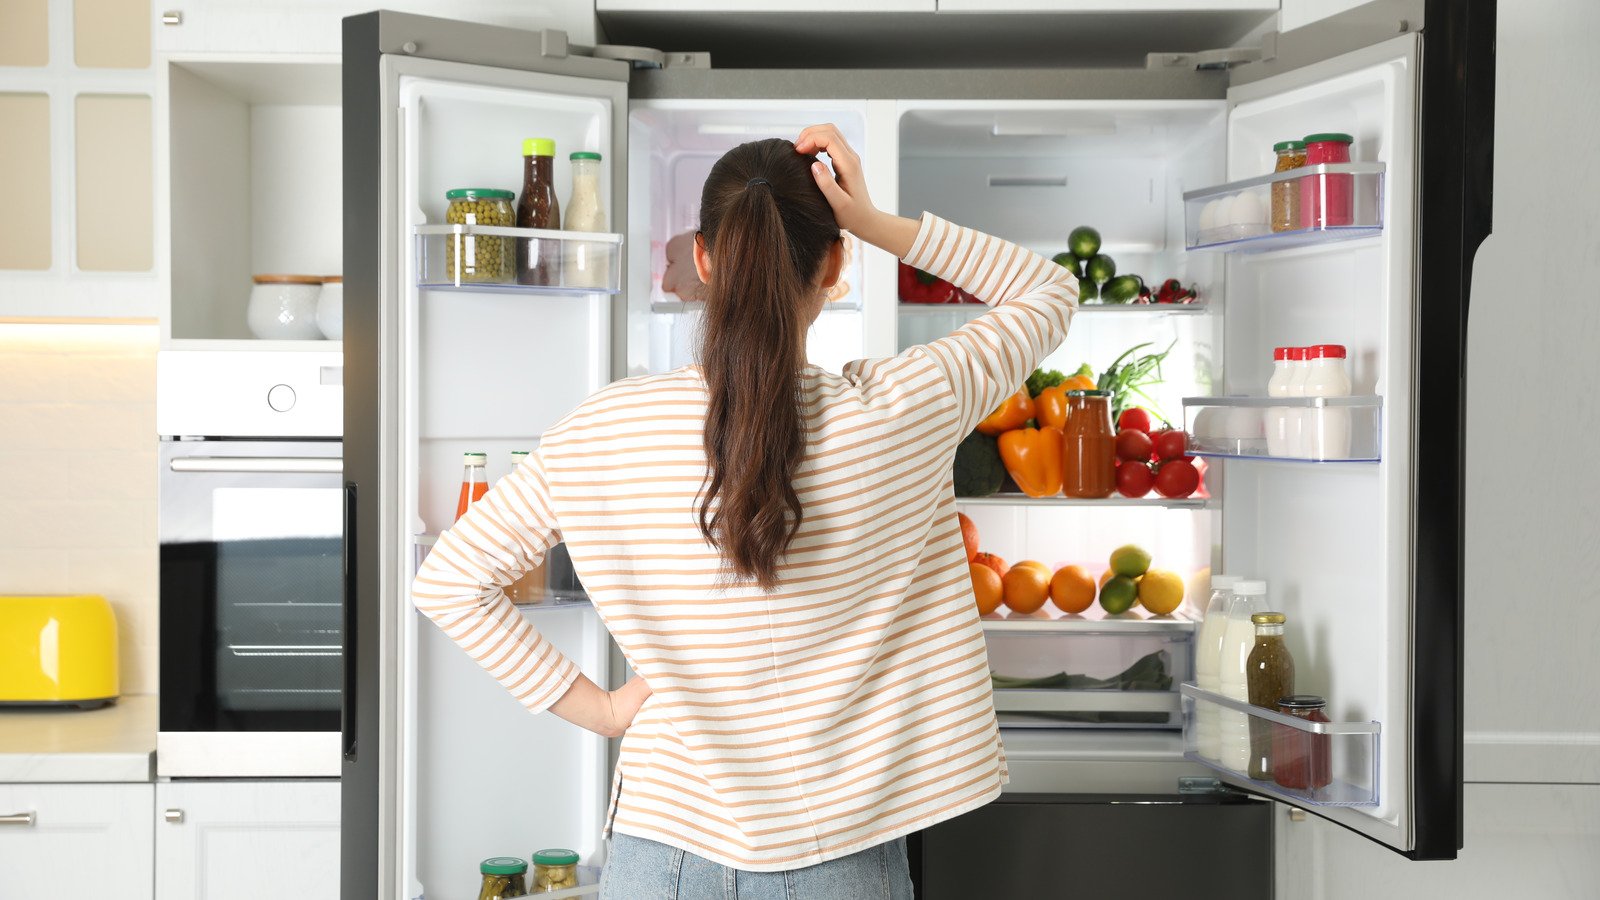 28 Foods You Should Never Refrigerate And How To Store Them Instead